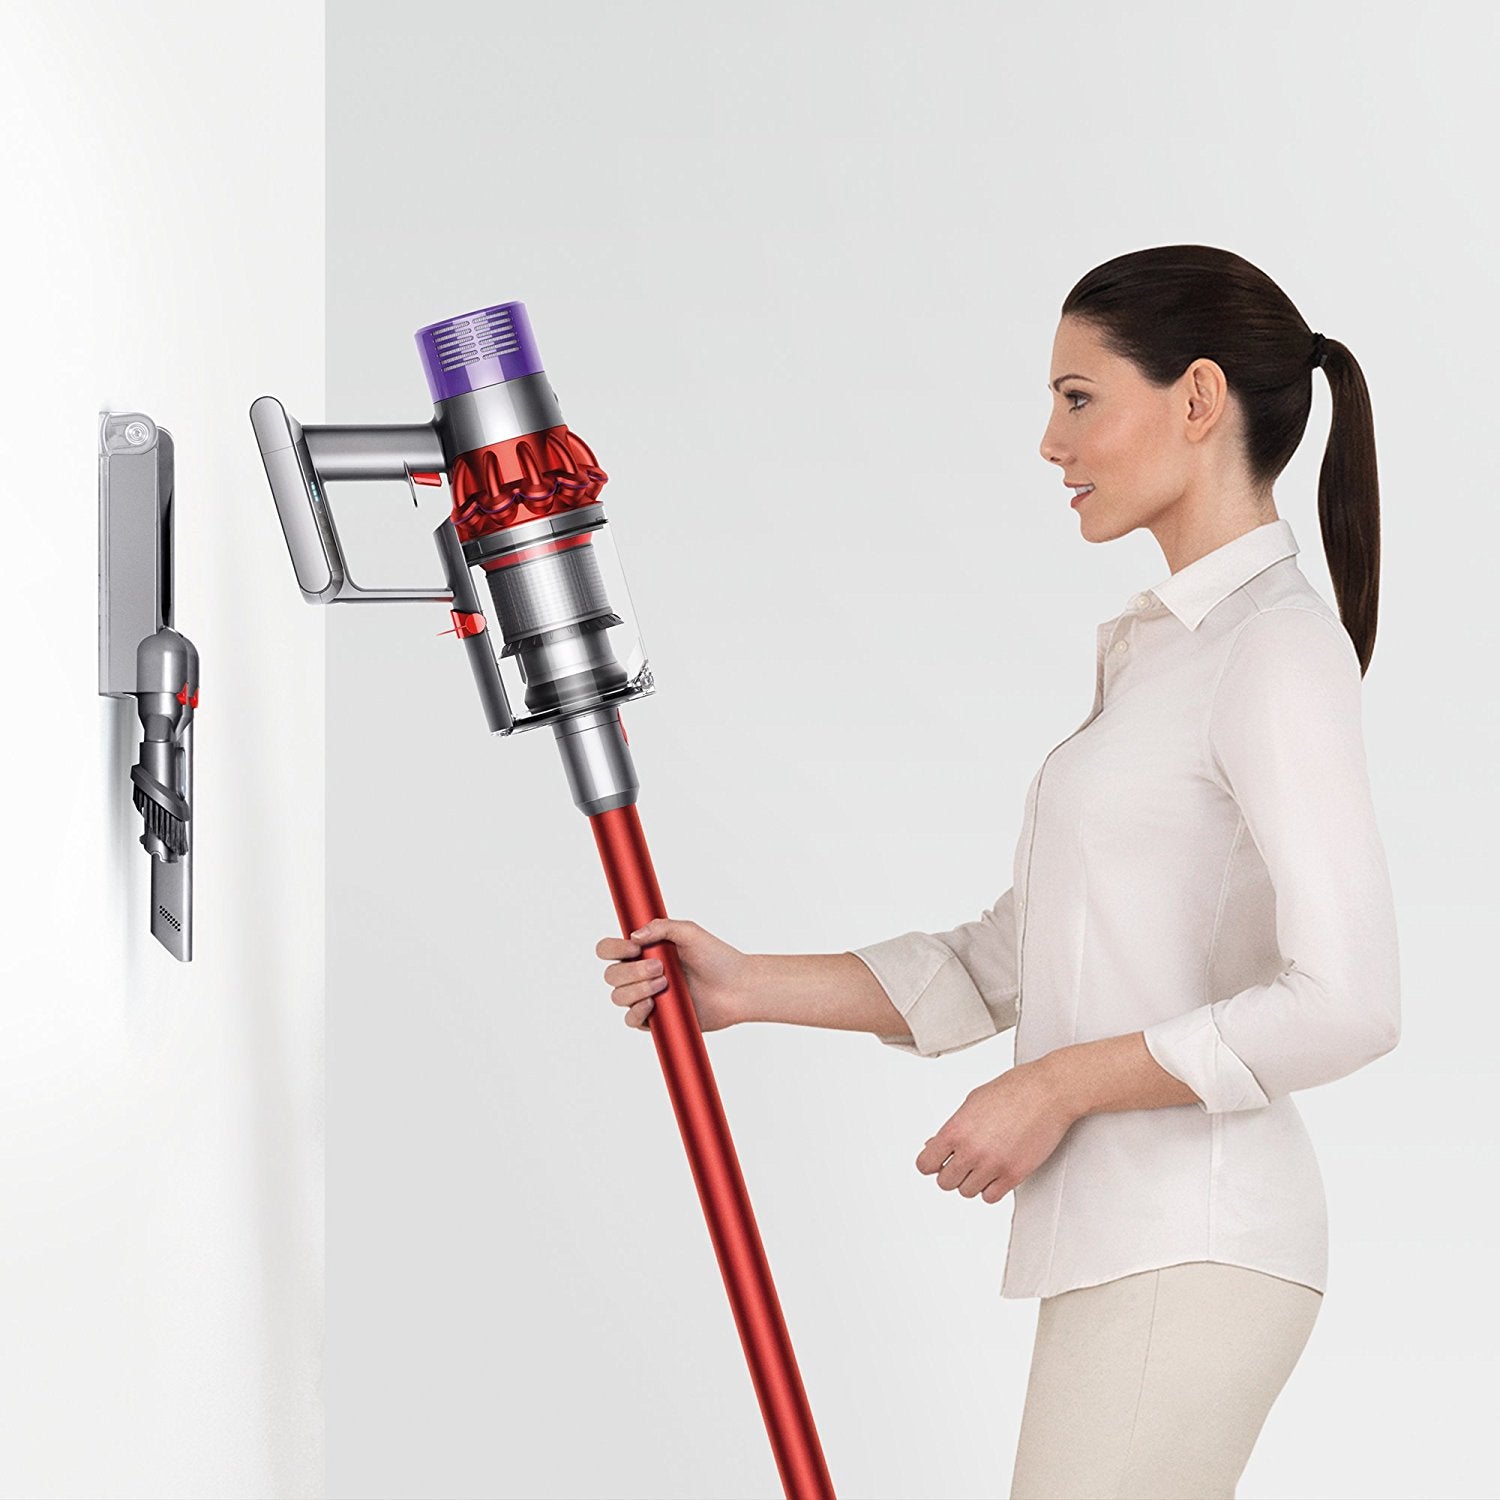 The Dyson Cyclone V10 cordless vacuum is more powerful than its uprights